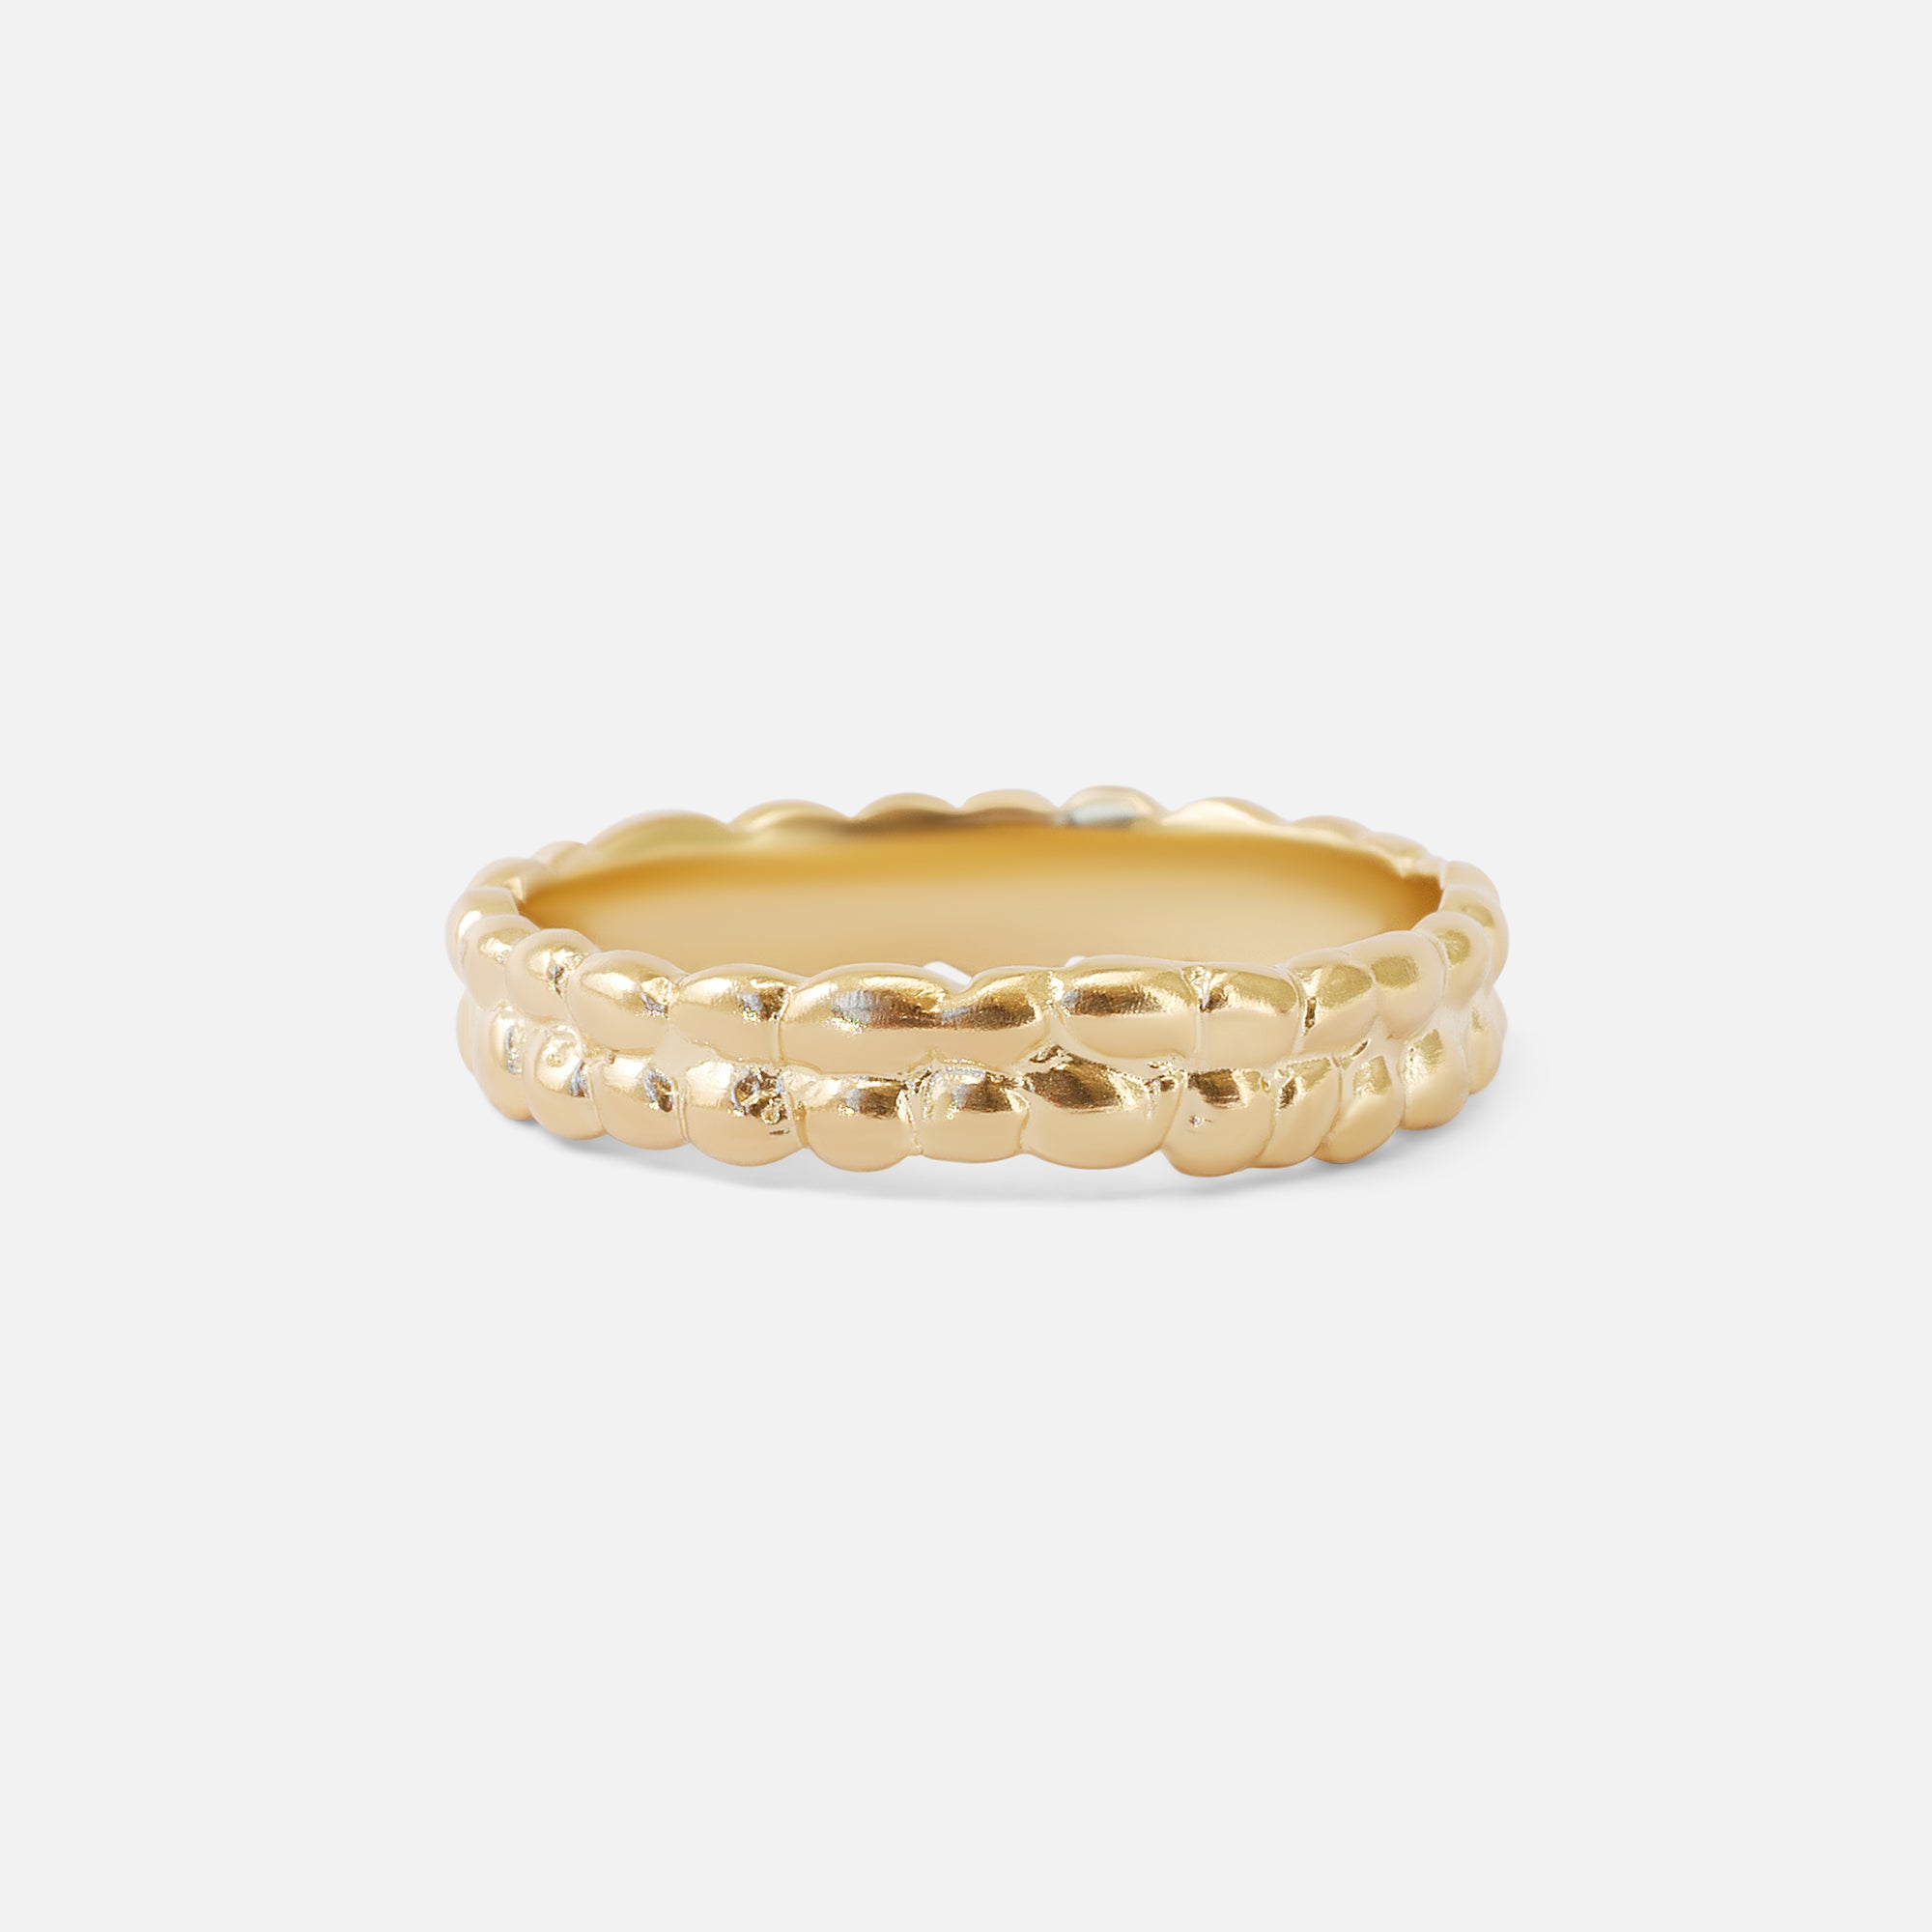 Semita / Ring By Alfonzo in Wedding Bands Category